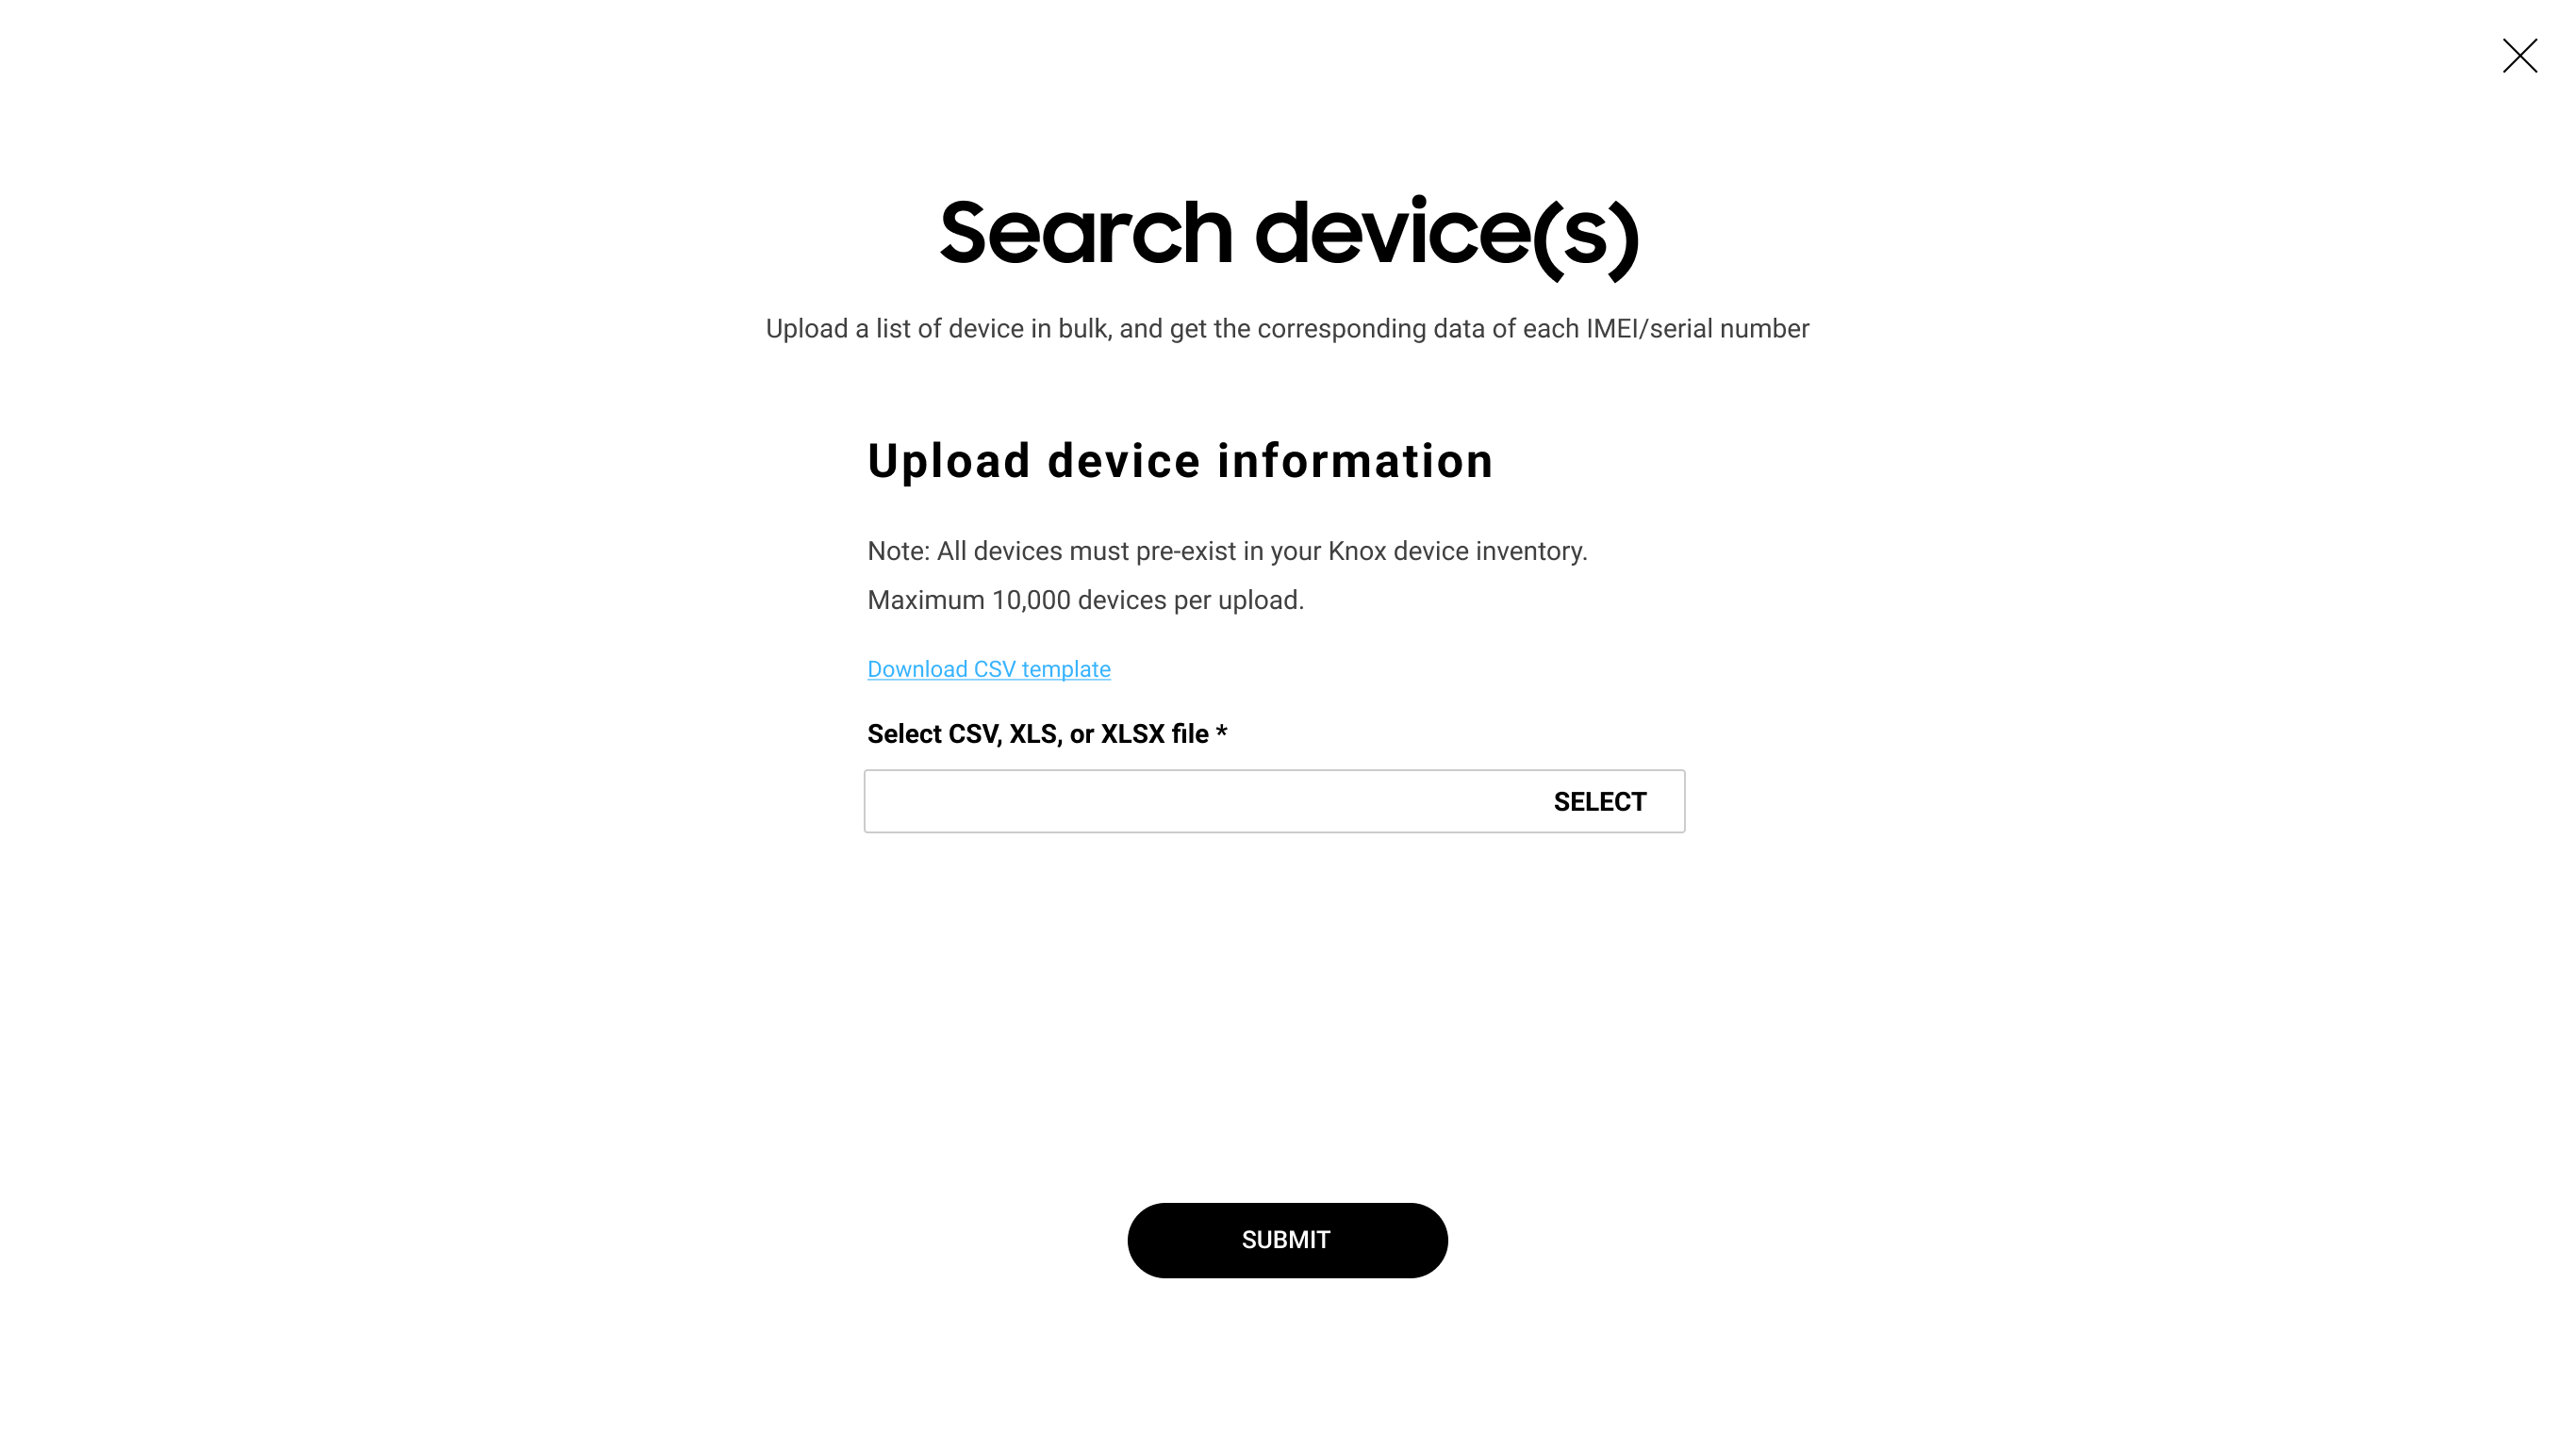 Search device(s) screen showing option to upload a CSV, XLS or XLSX file